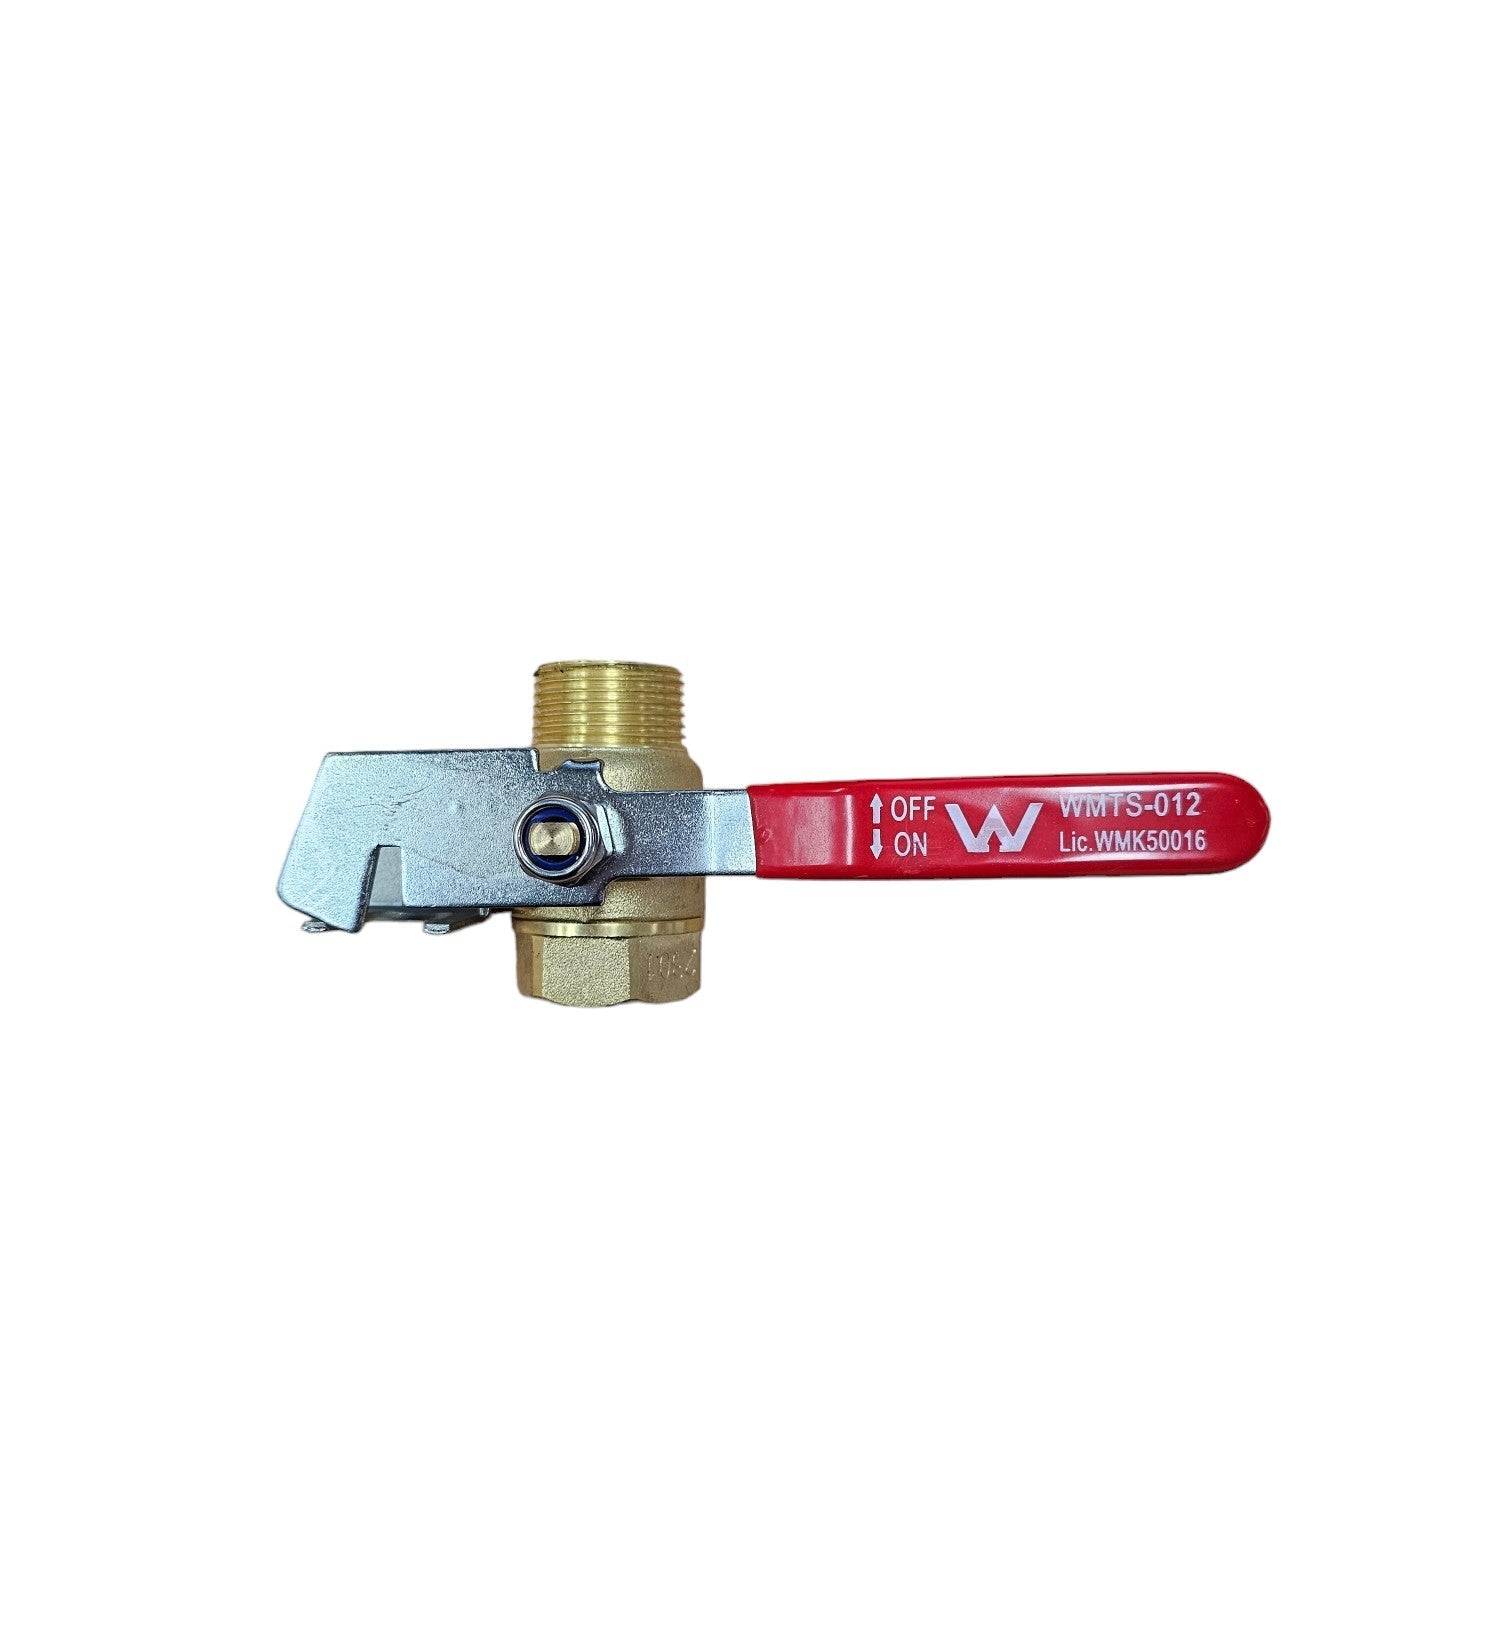 25mm hose reel ball valve suits wolf hose reels - Premium  from Wolf - Shop now at Firebox Australia